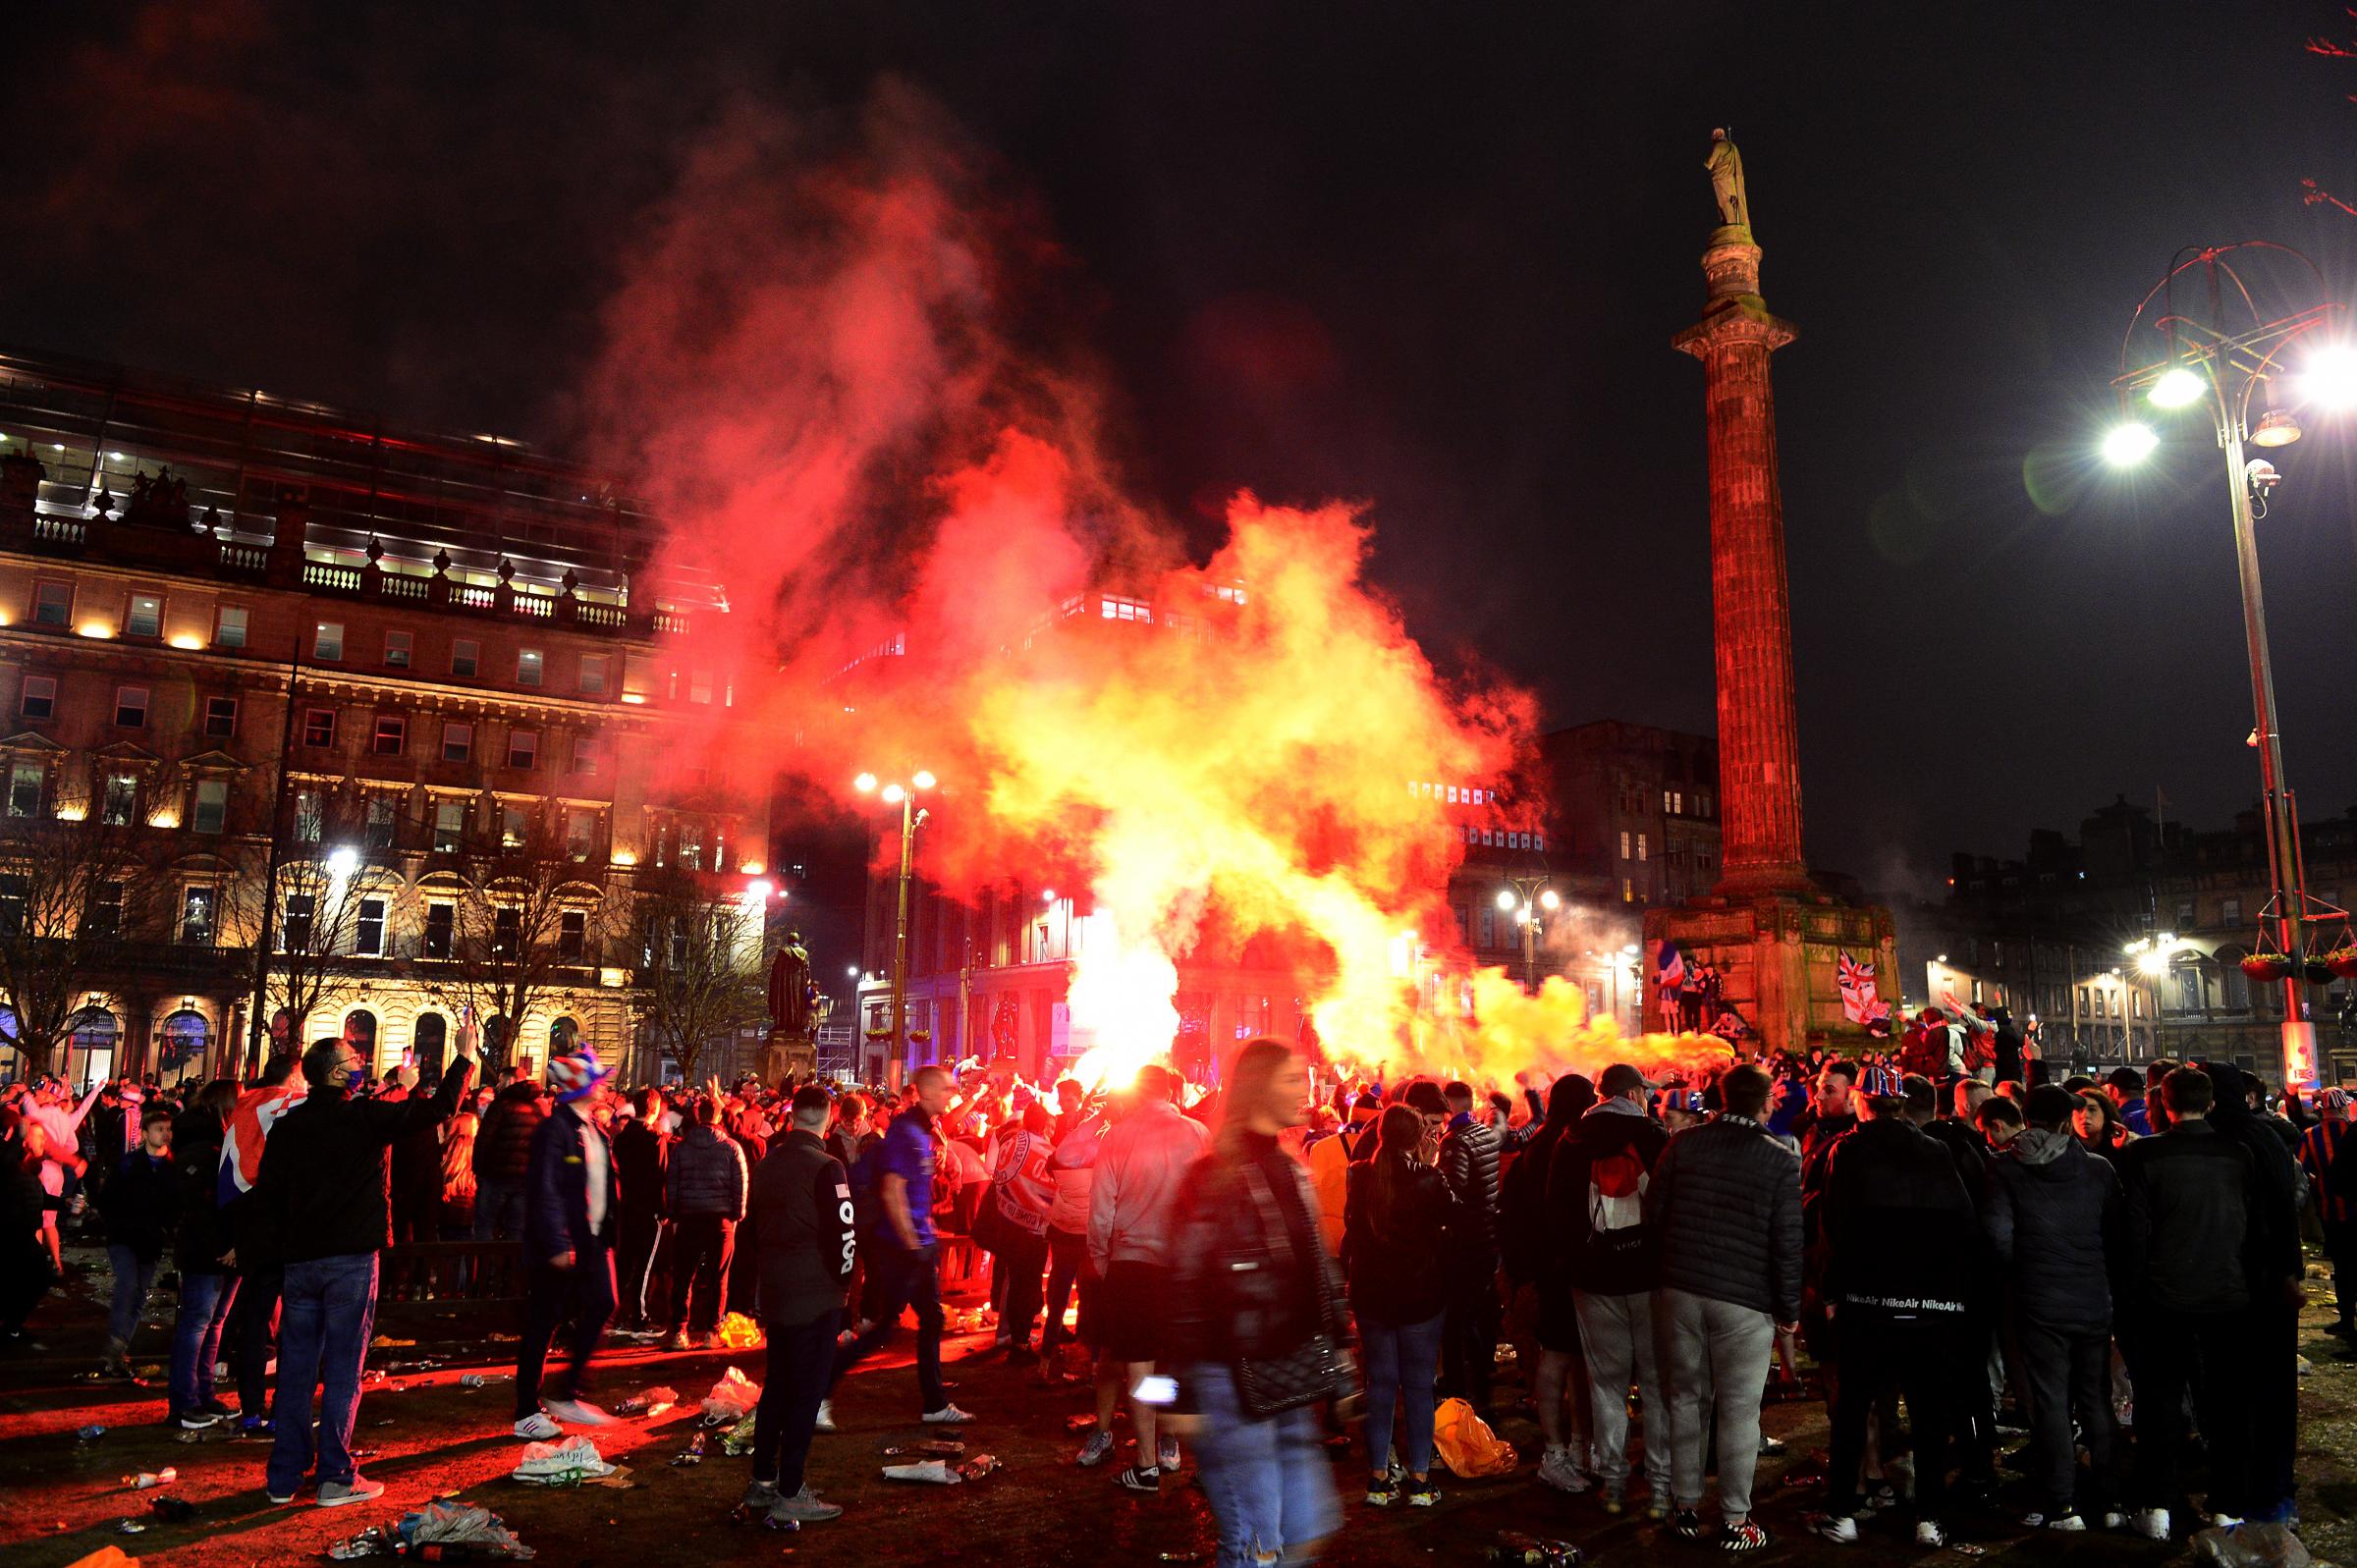 GLASGOW, SCOTLAND - MARCH 07: Rangers fans stand on the monument as they set off flares in George Square to celebrate their team winning the Scottish Premiership title on March 07, 2021 in Glasgow, Scotland. (Photo by Mark Runnacles/Getty Images).